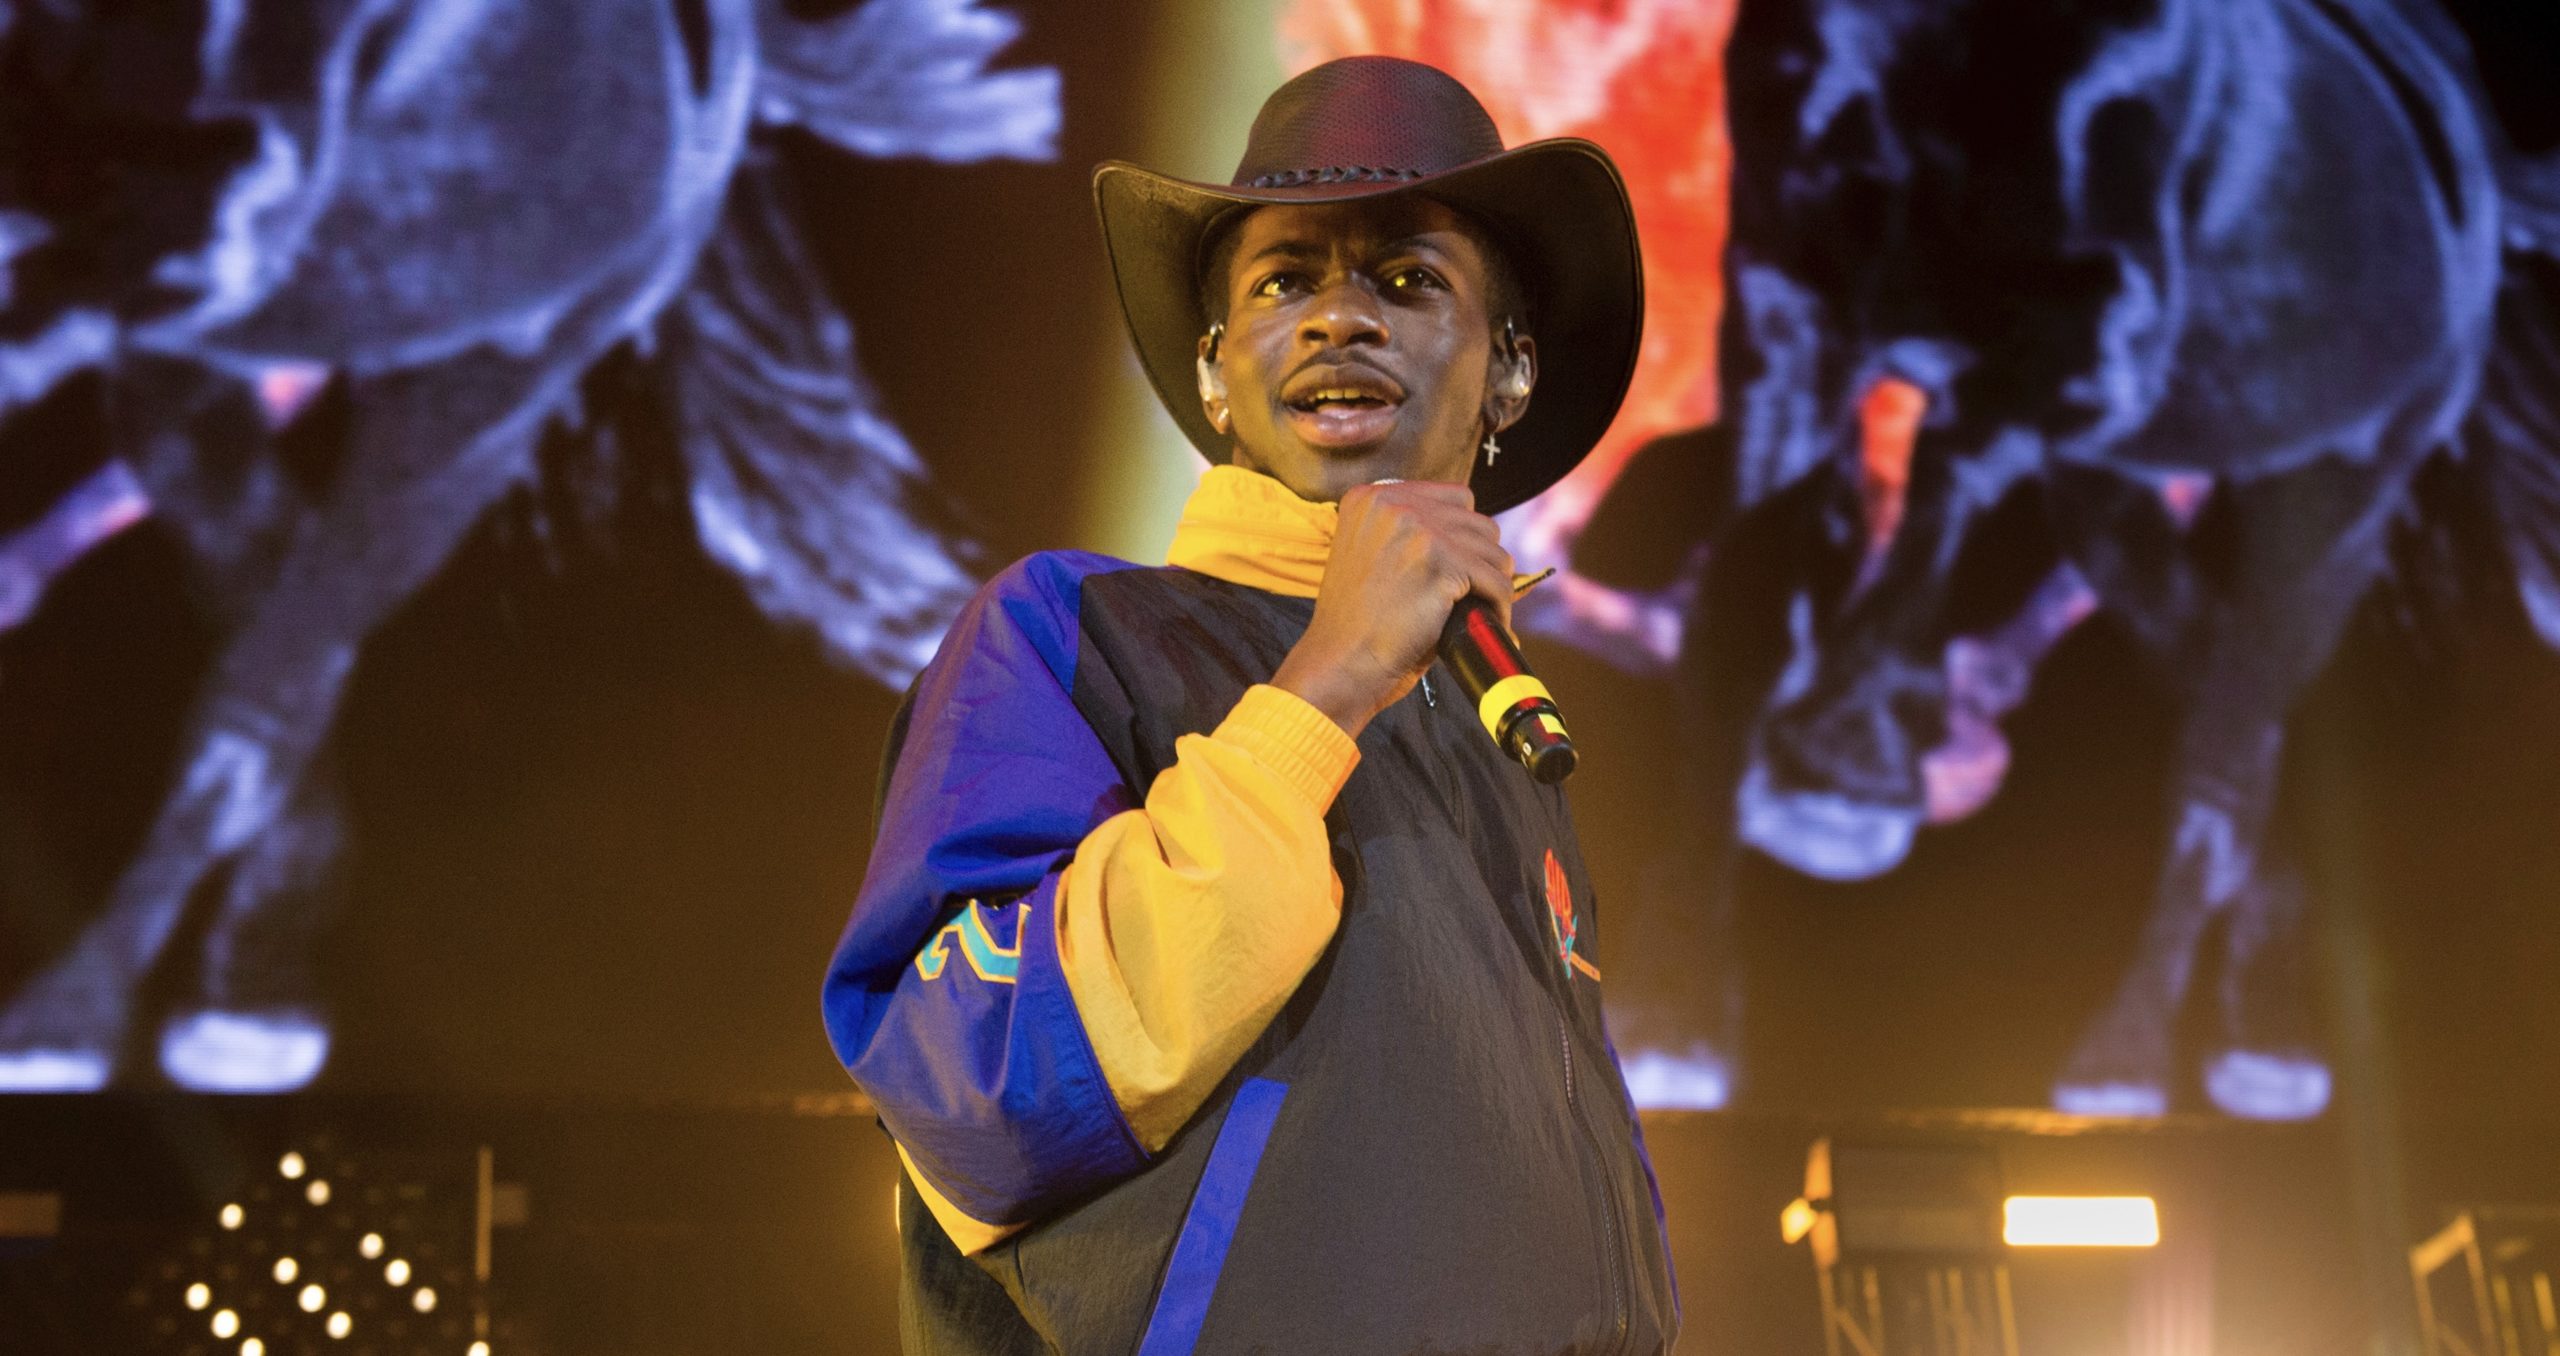 Lil Nas X Is ‘Never Shopping’ At Target Again After Being ‘Offended’ By One Of Their ‘Ridiculous’ Products [Photo]